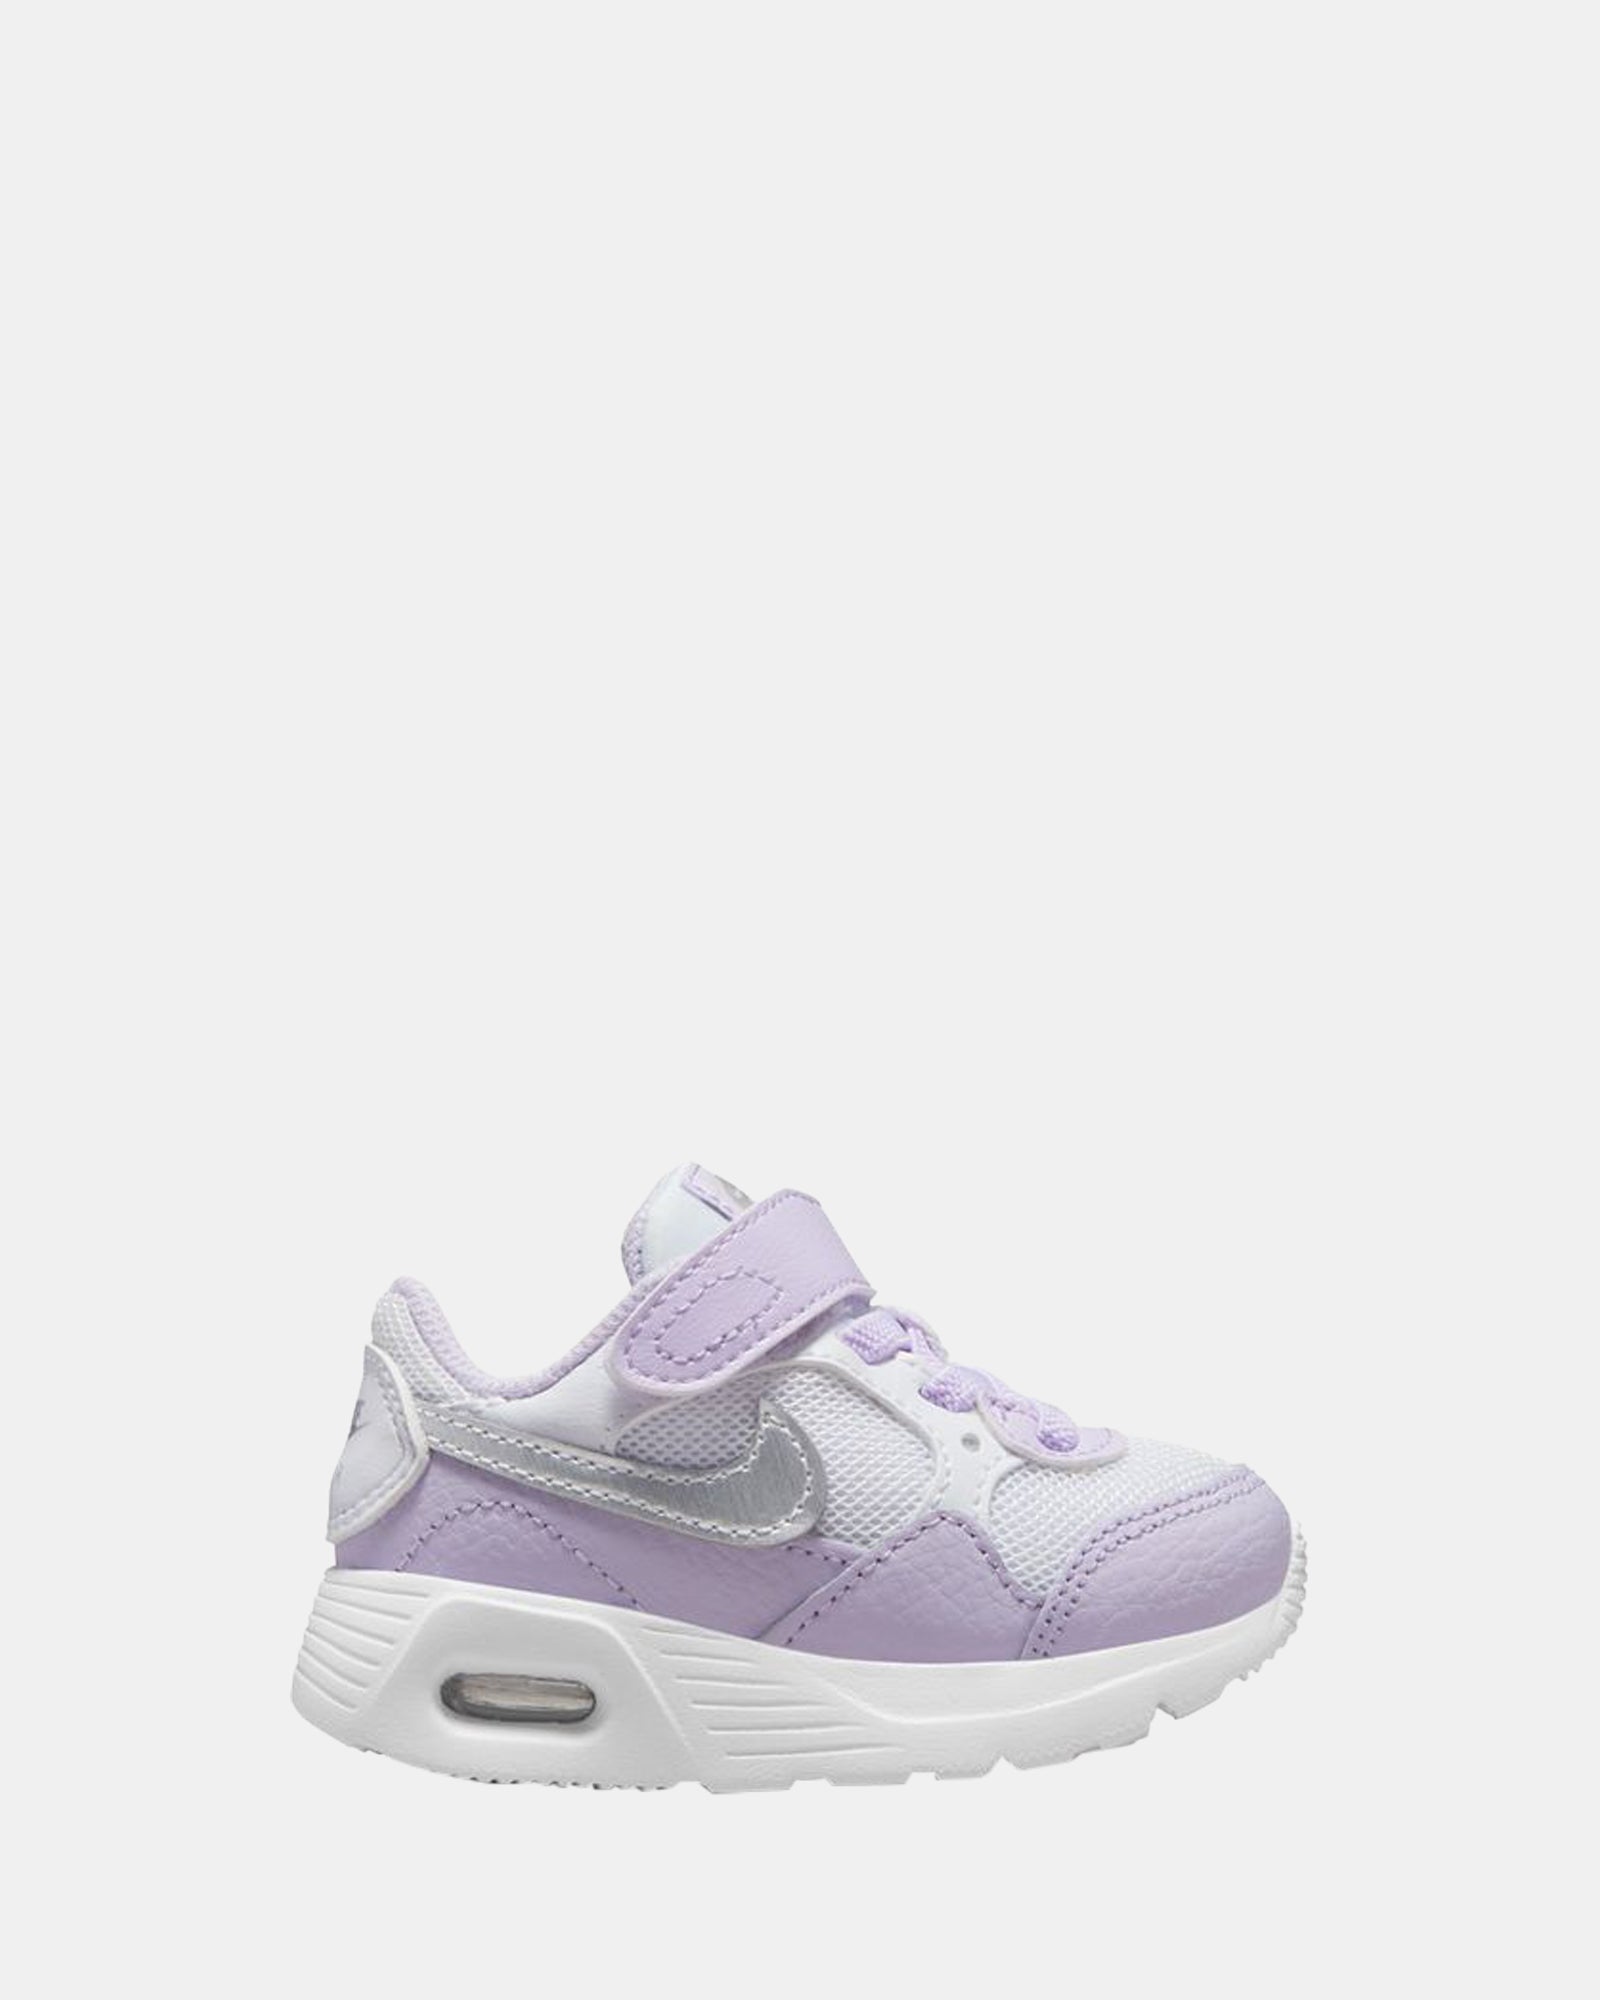 Air Max SC Infant White/Silver/Violet Frost